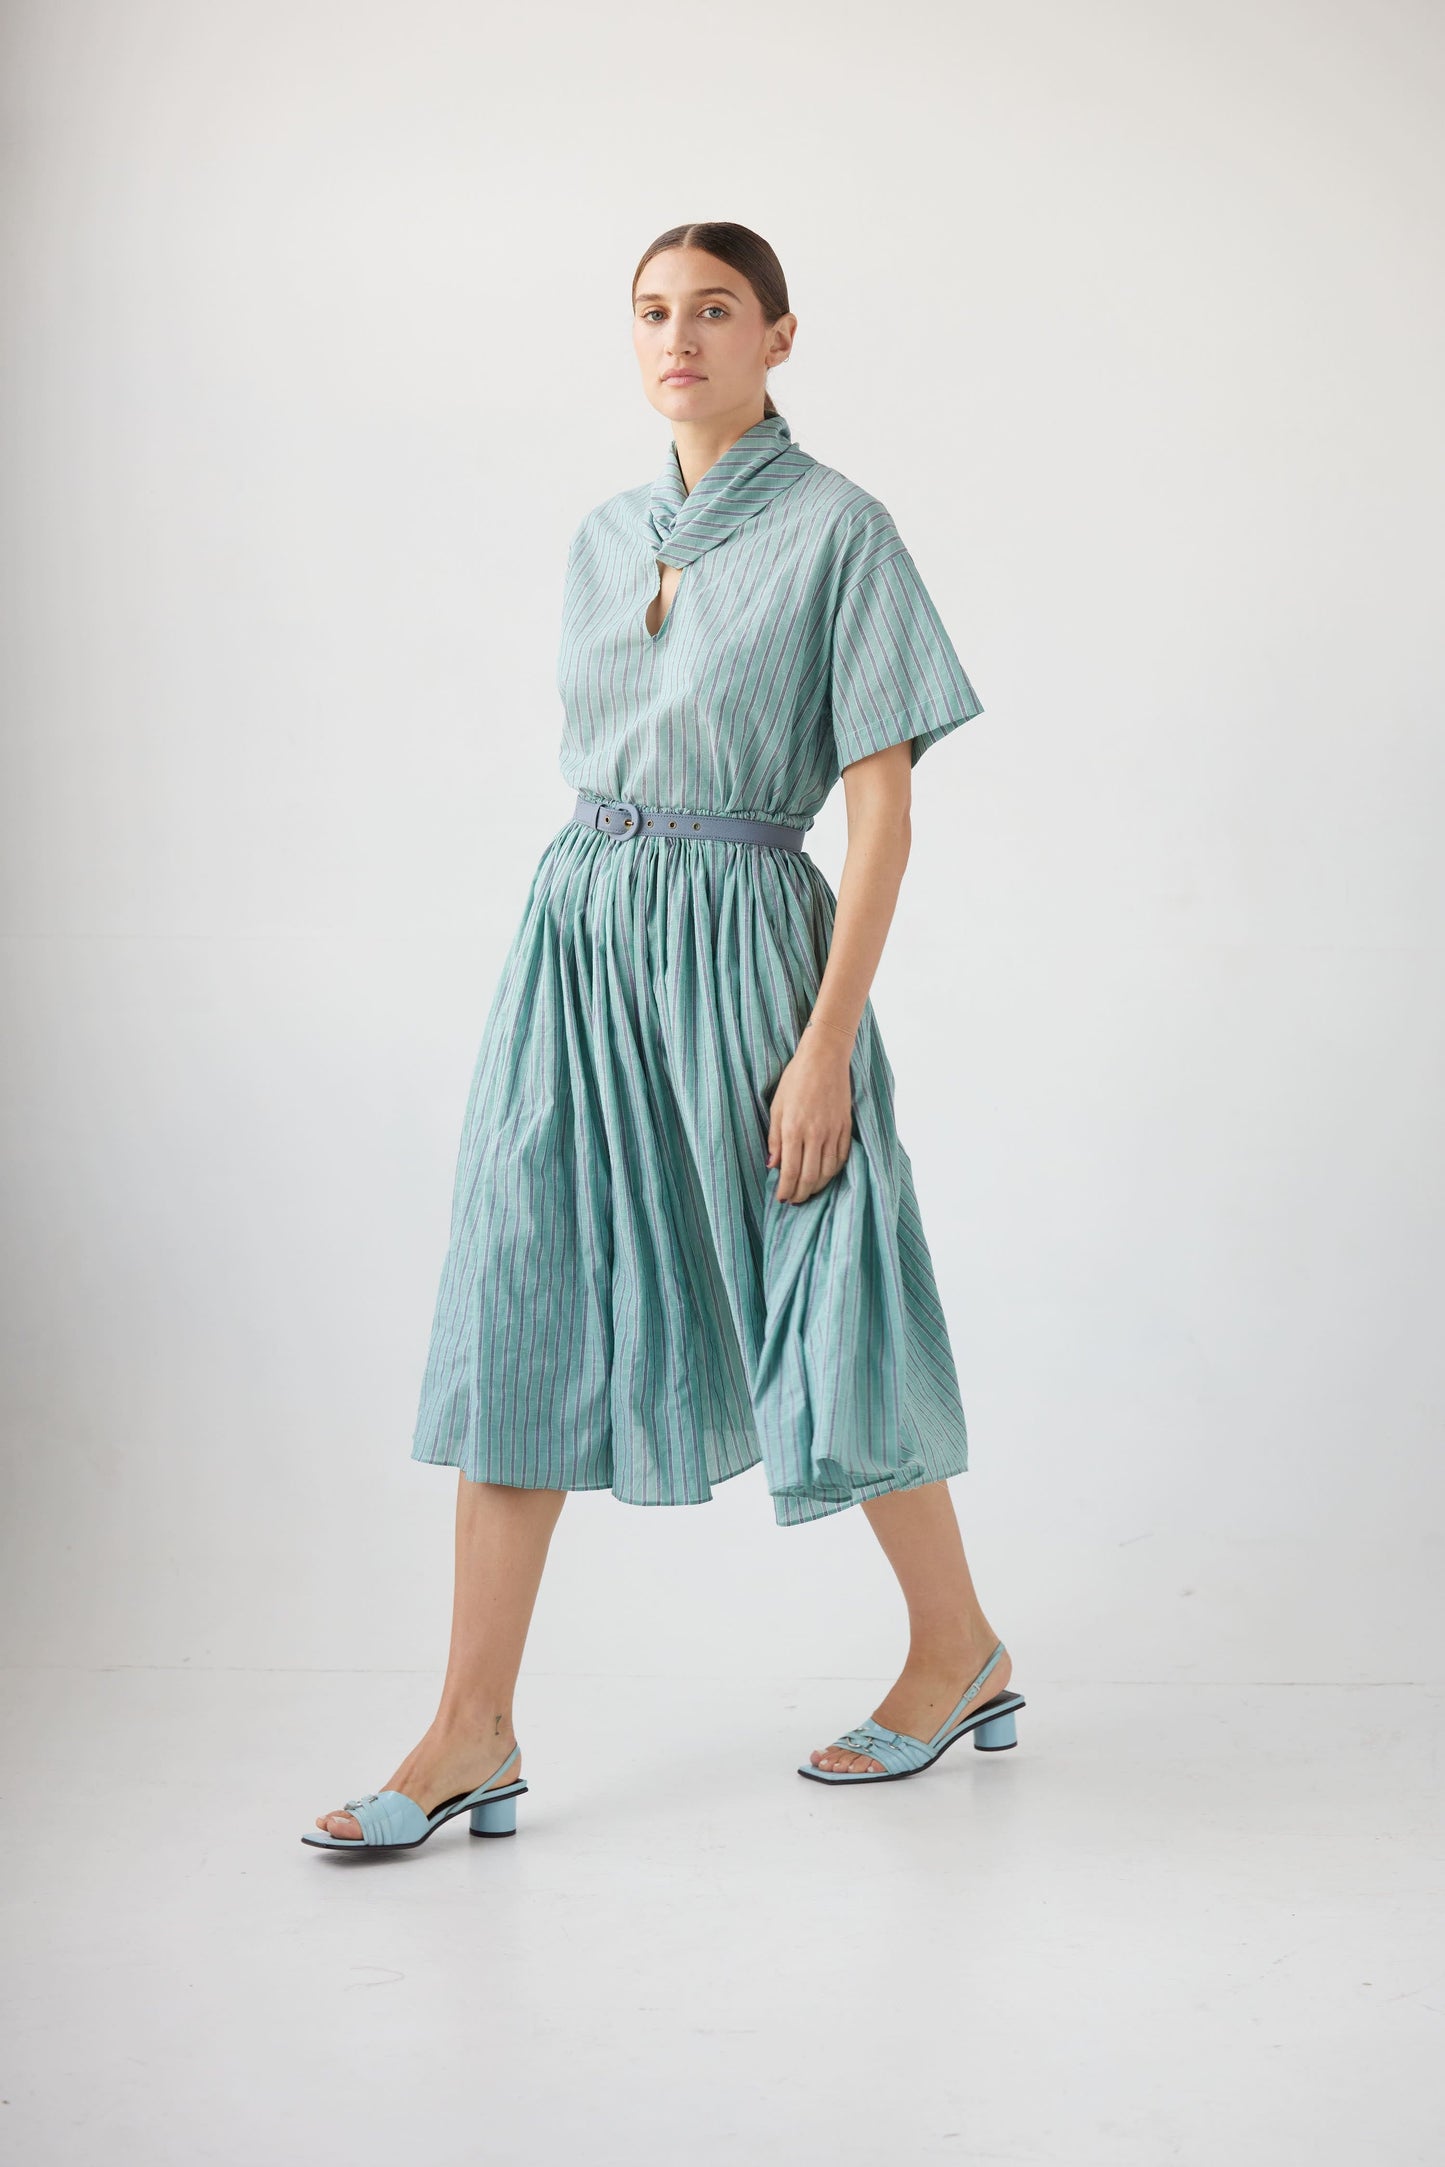 Erica Skirt in Summer Cotton Skirts CHRISTINE ALCALAY Green Stripe Extra Small / Small 